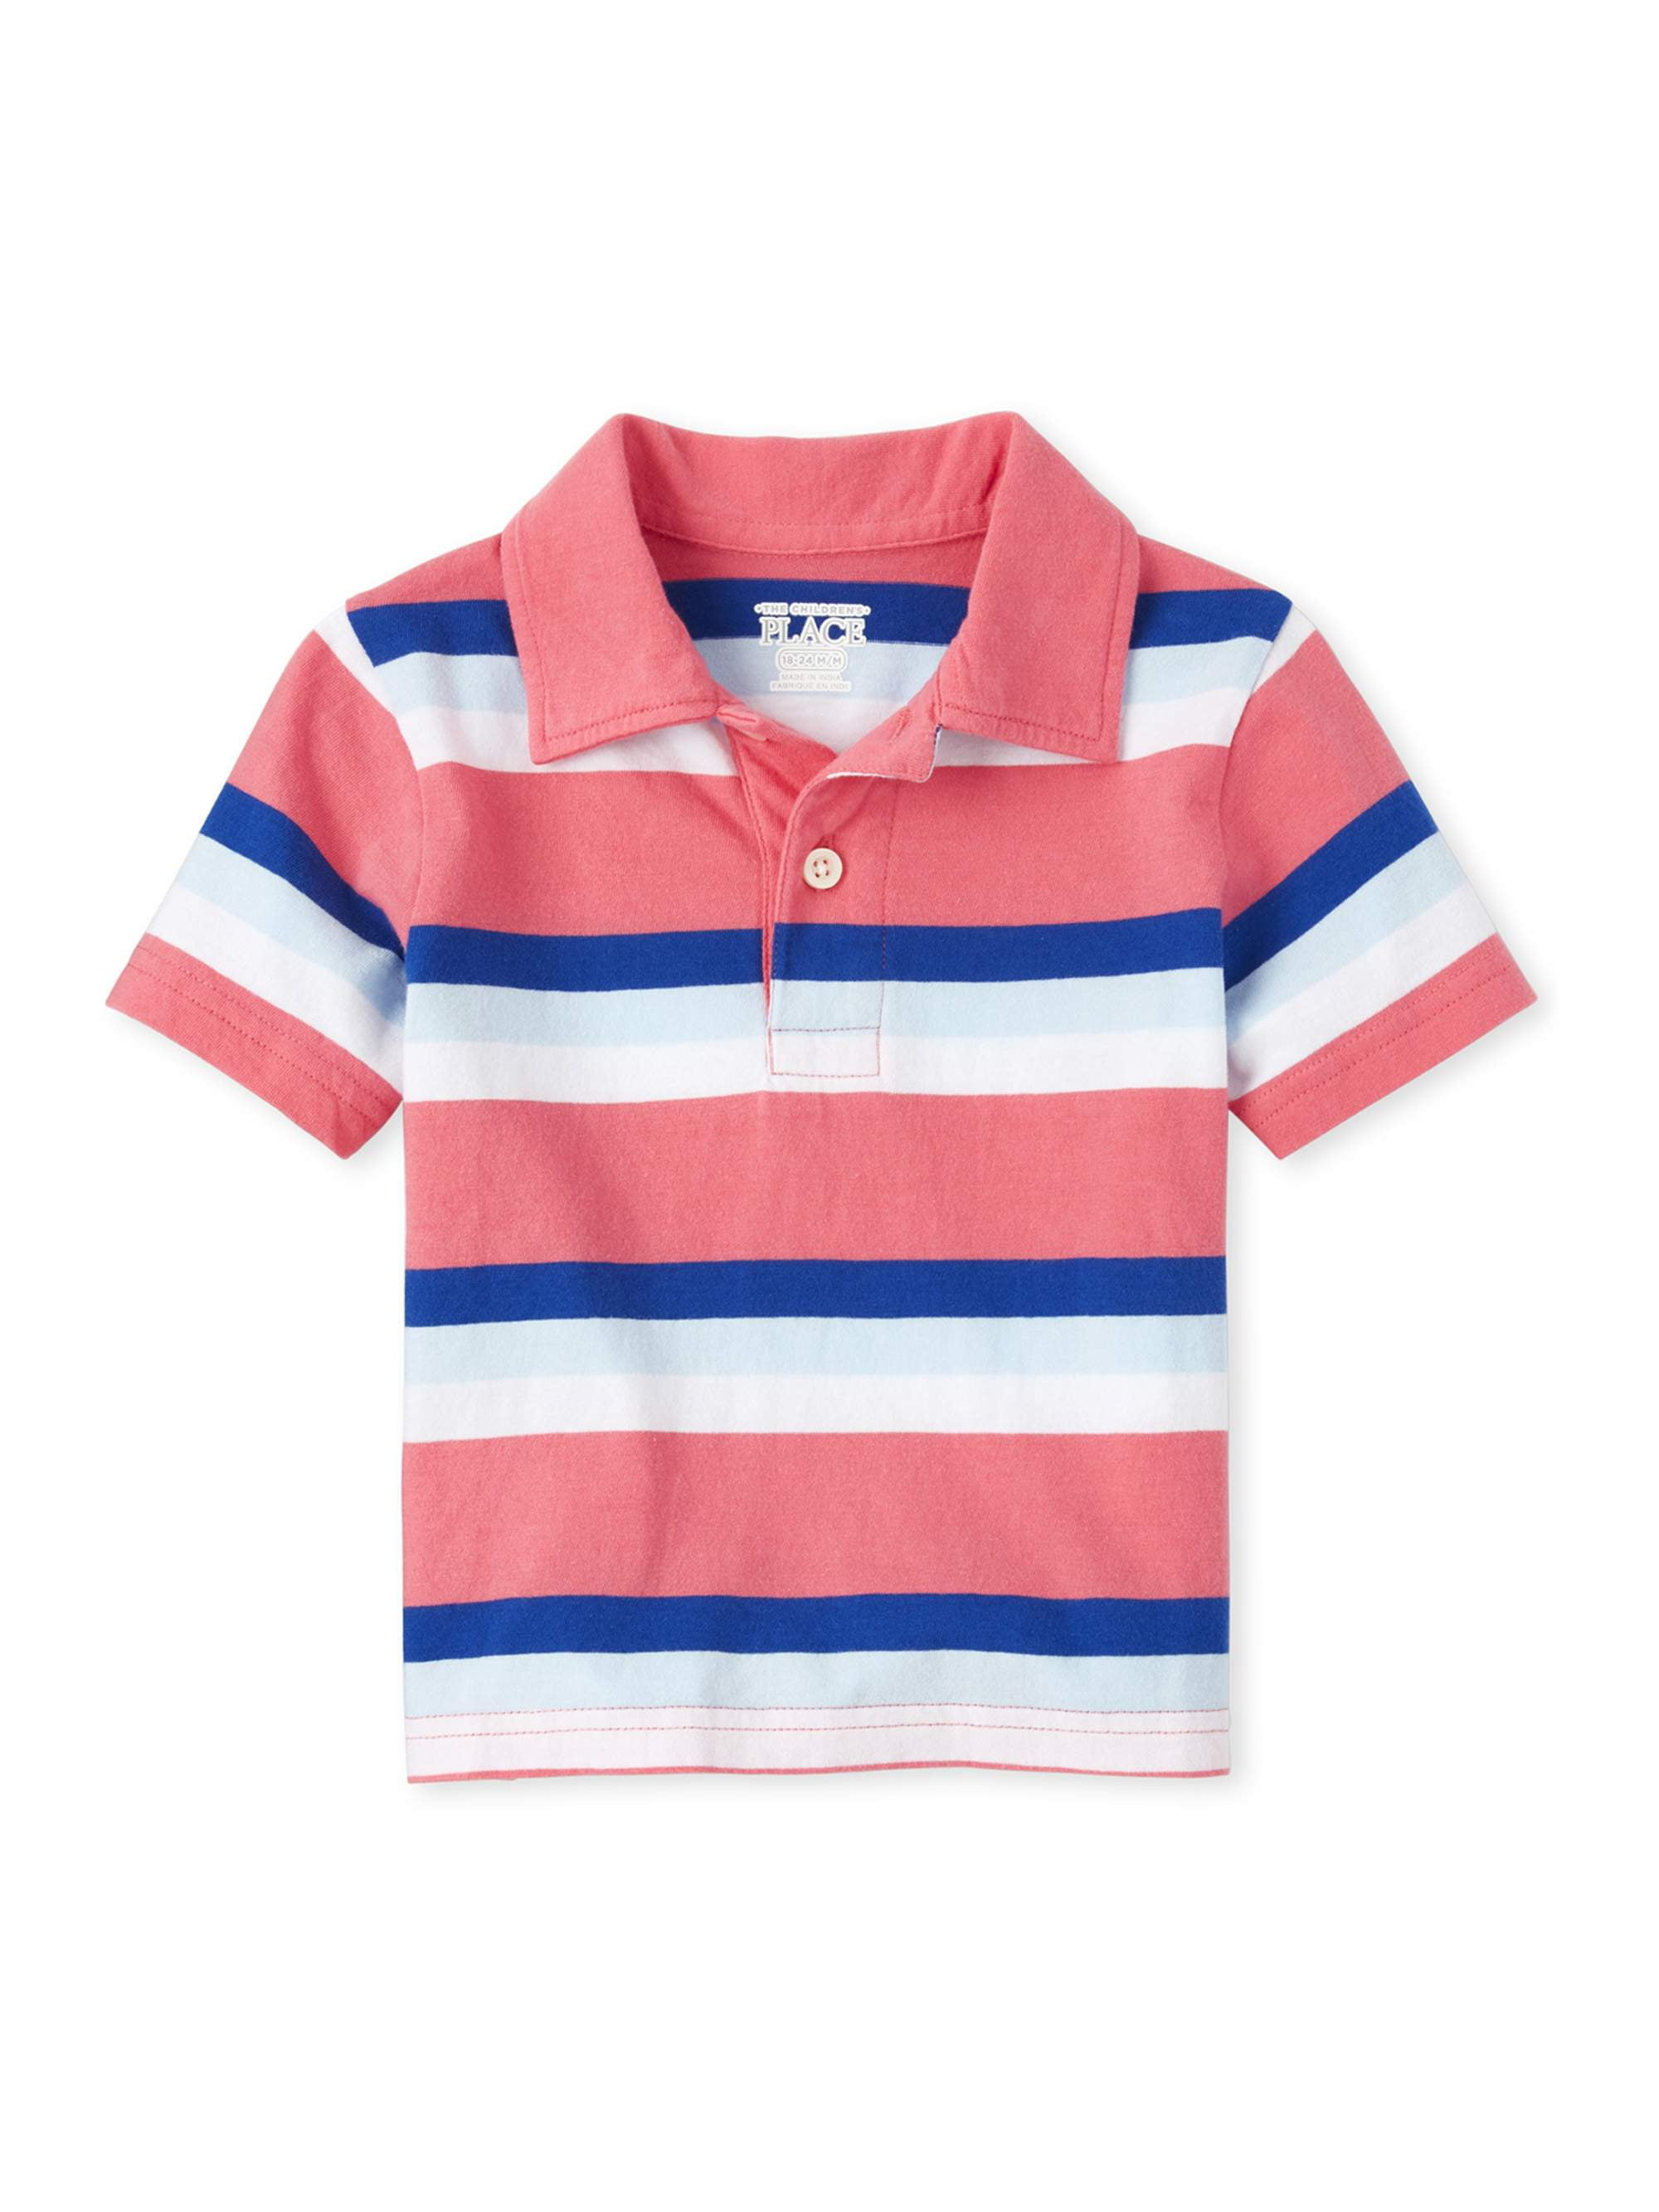 The Children's Place Boys' 5 Pack Short Sleeve Pique Polo